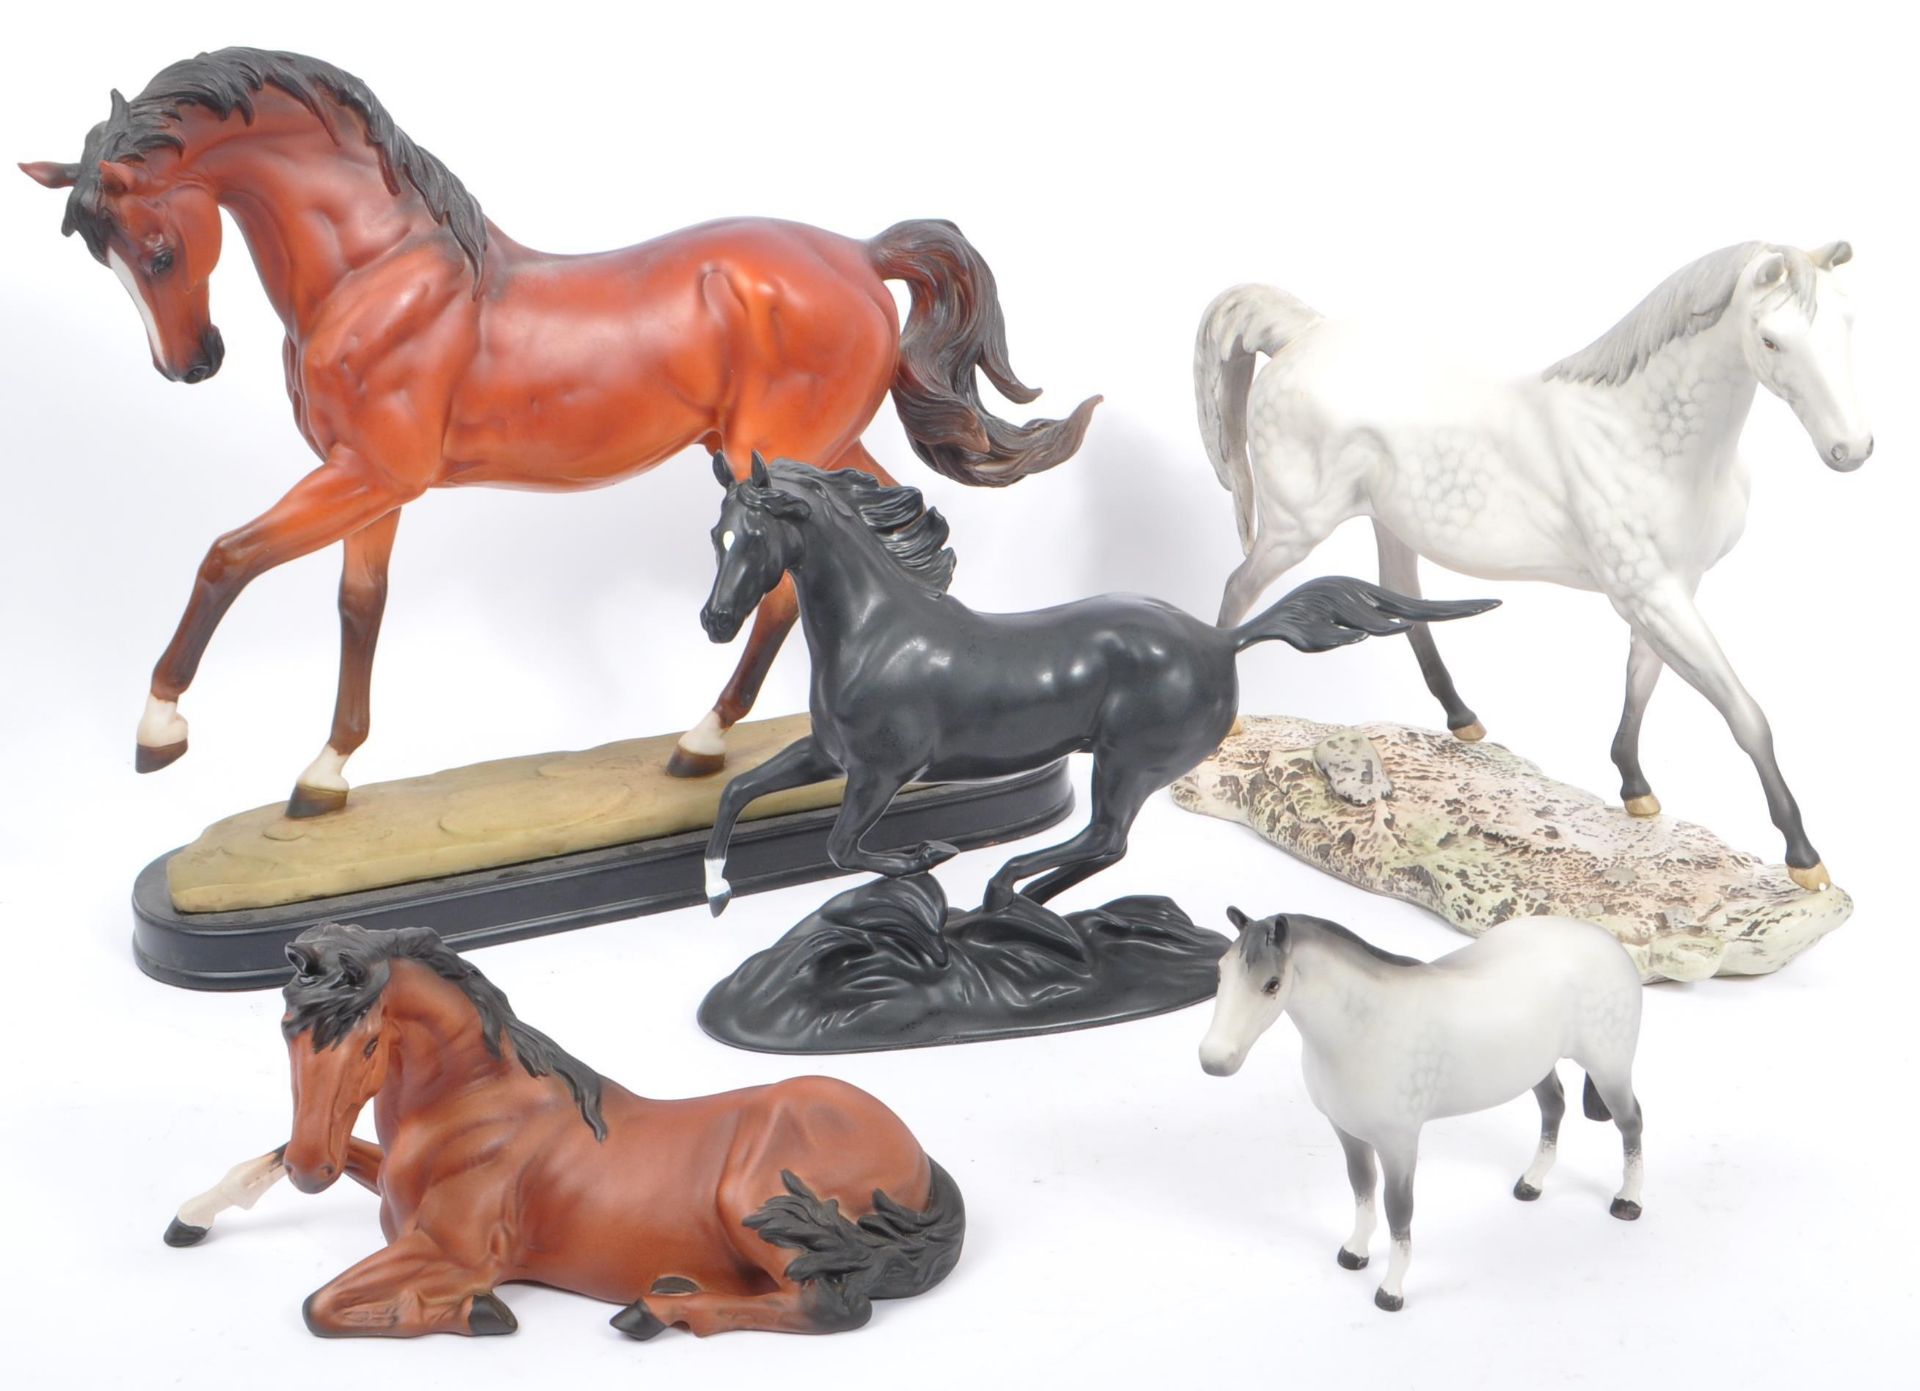 BESWICK - COLLECTION OF PORCELAIN HORSE FIGURINES